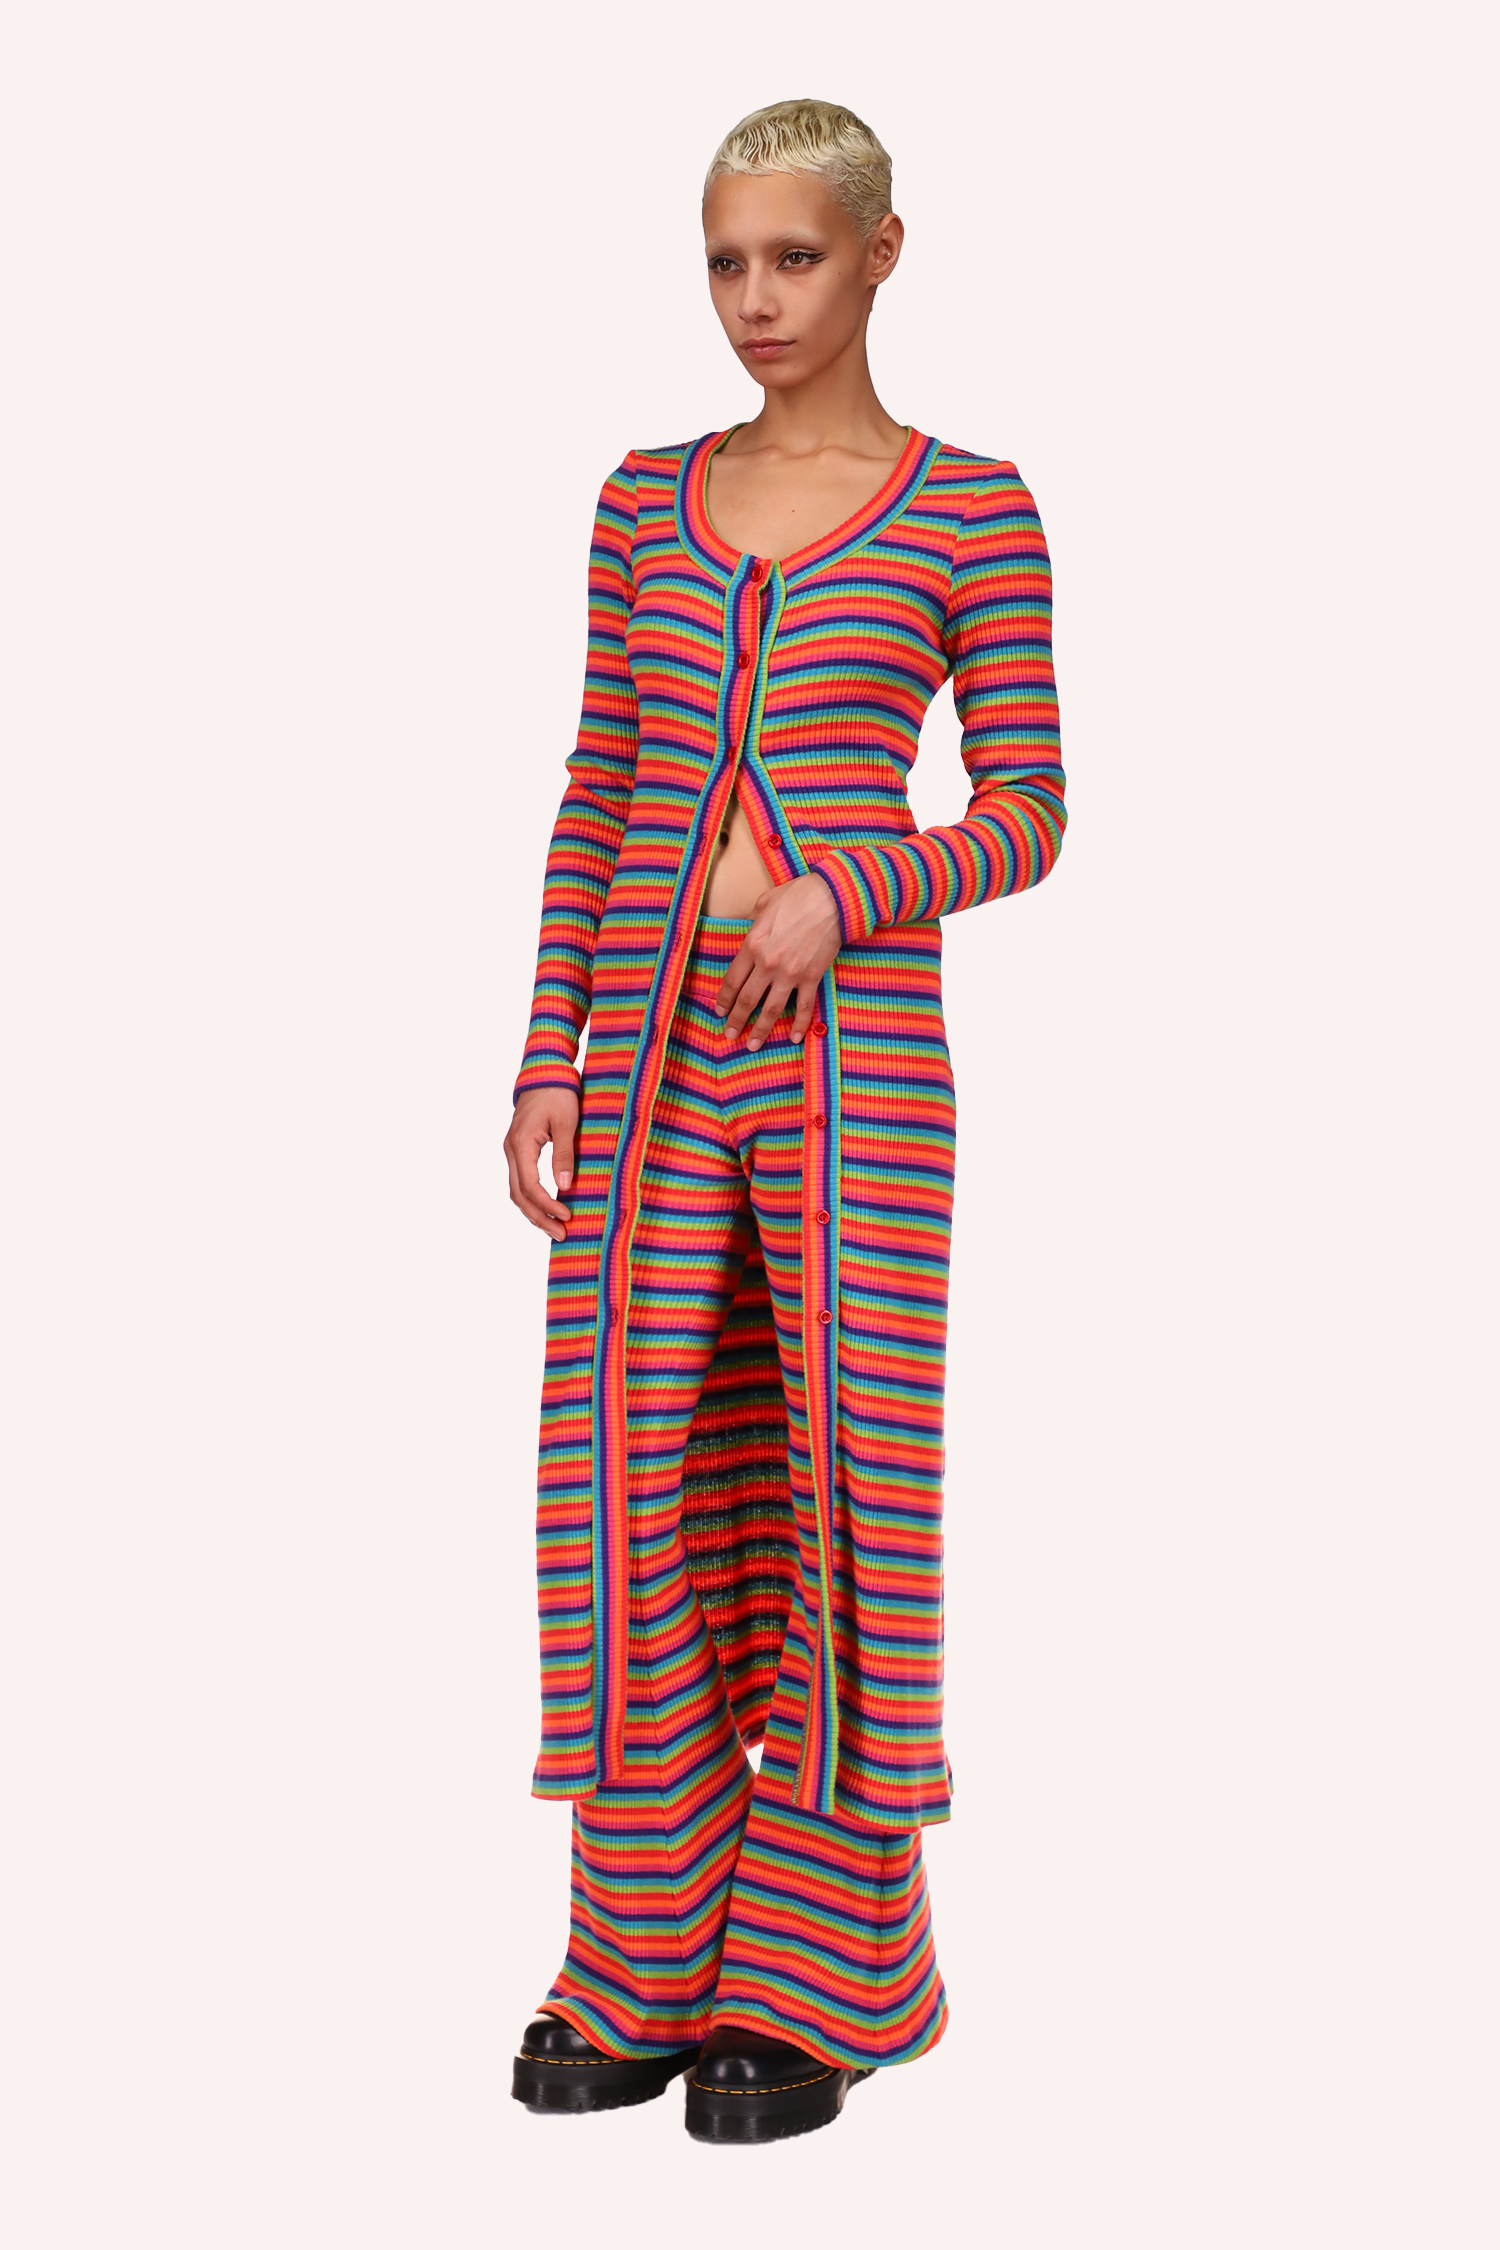 You. Can match all Rainbow Stripe attire together for a stunning look